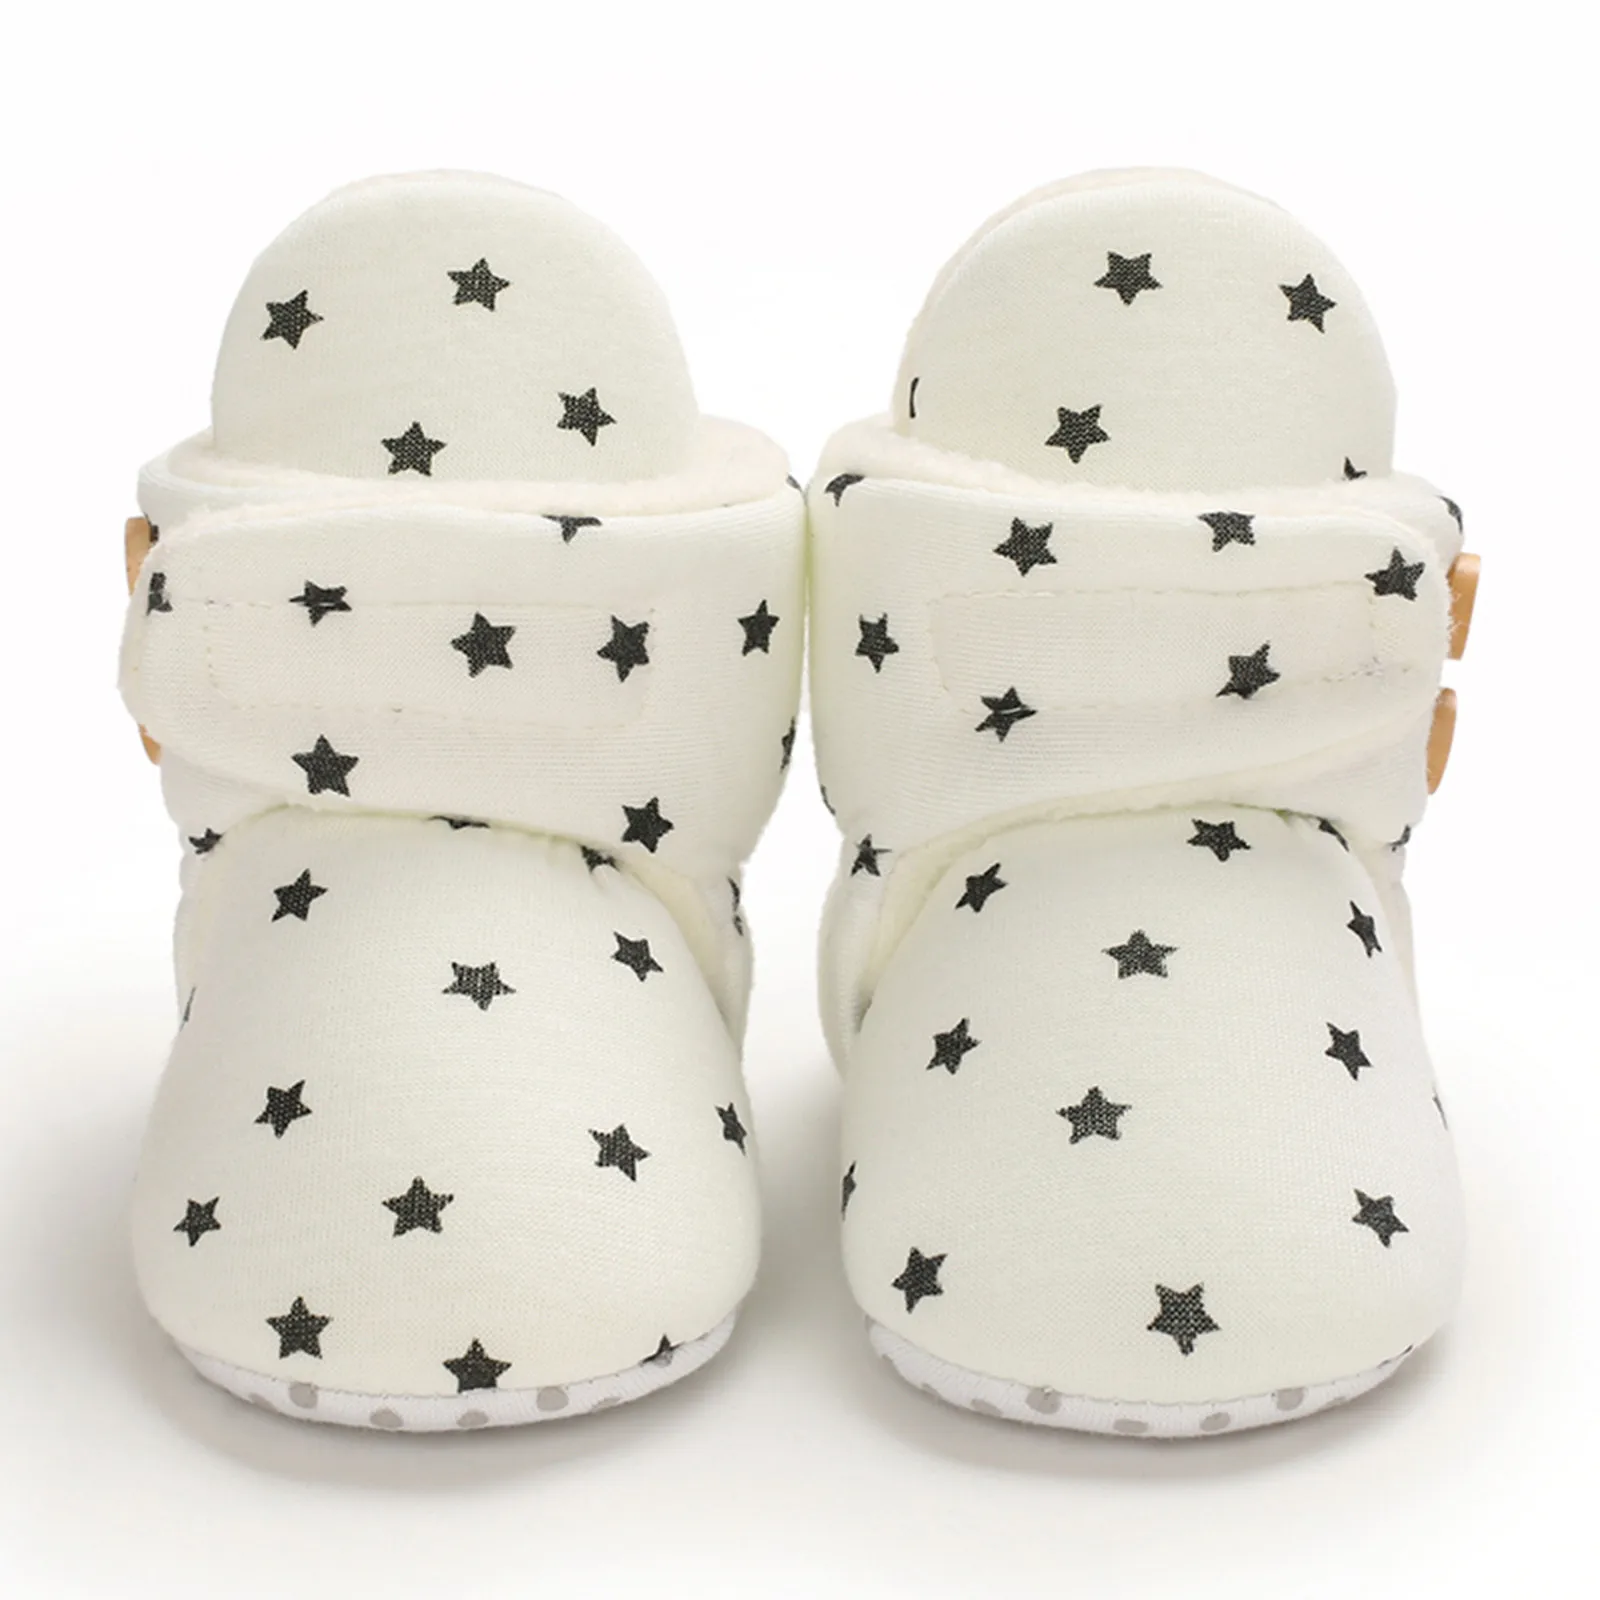 

New Newborn Baby Shoes Boy Girl Toddler First Walkers Booties Cotton Soft Anti-slip Hook Loop Warm Infant Crib Shoes Autumn